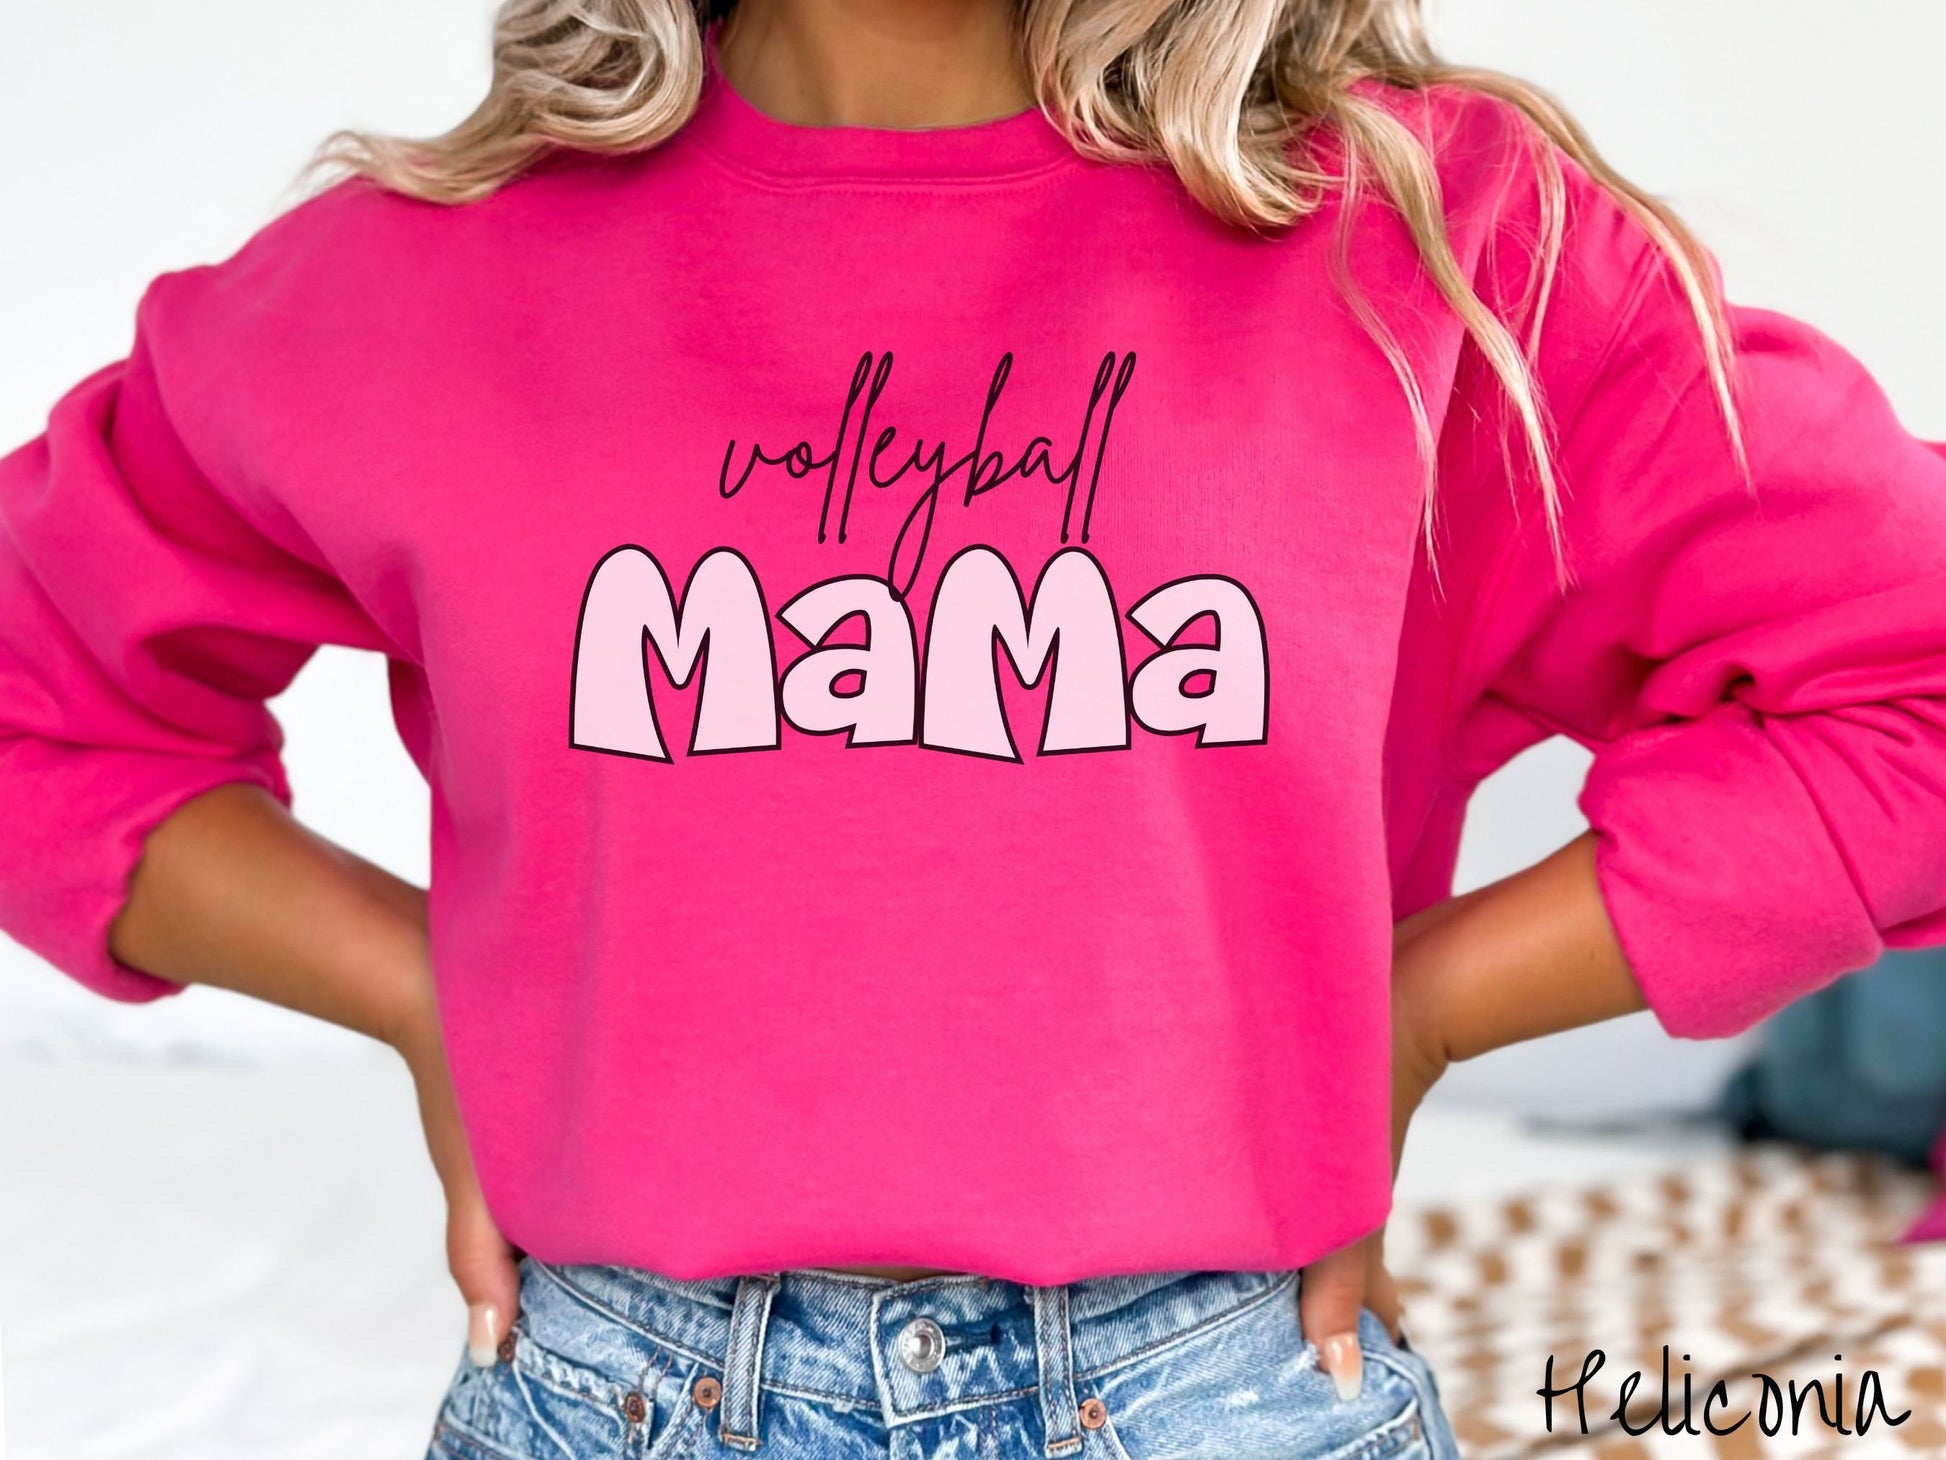 A woman wearing a cute, vintage heliconia colored sweatshirt with the word volleyball across the front in black, undercase cursive writing. Below that is the word Mama in large, white font.